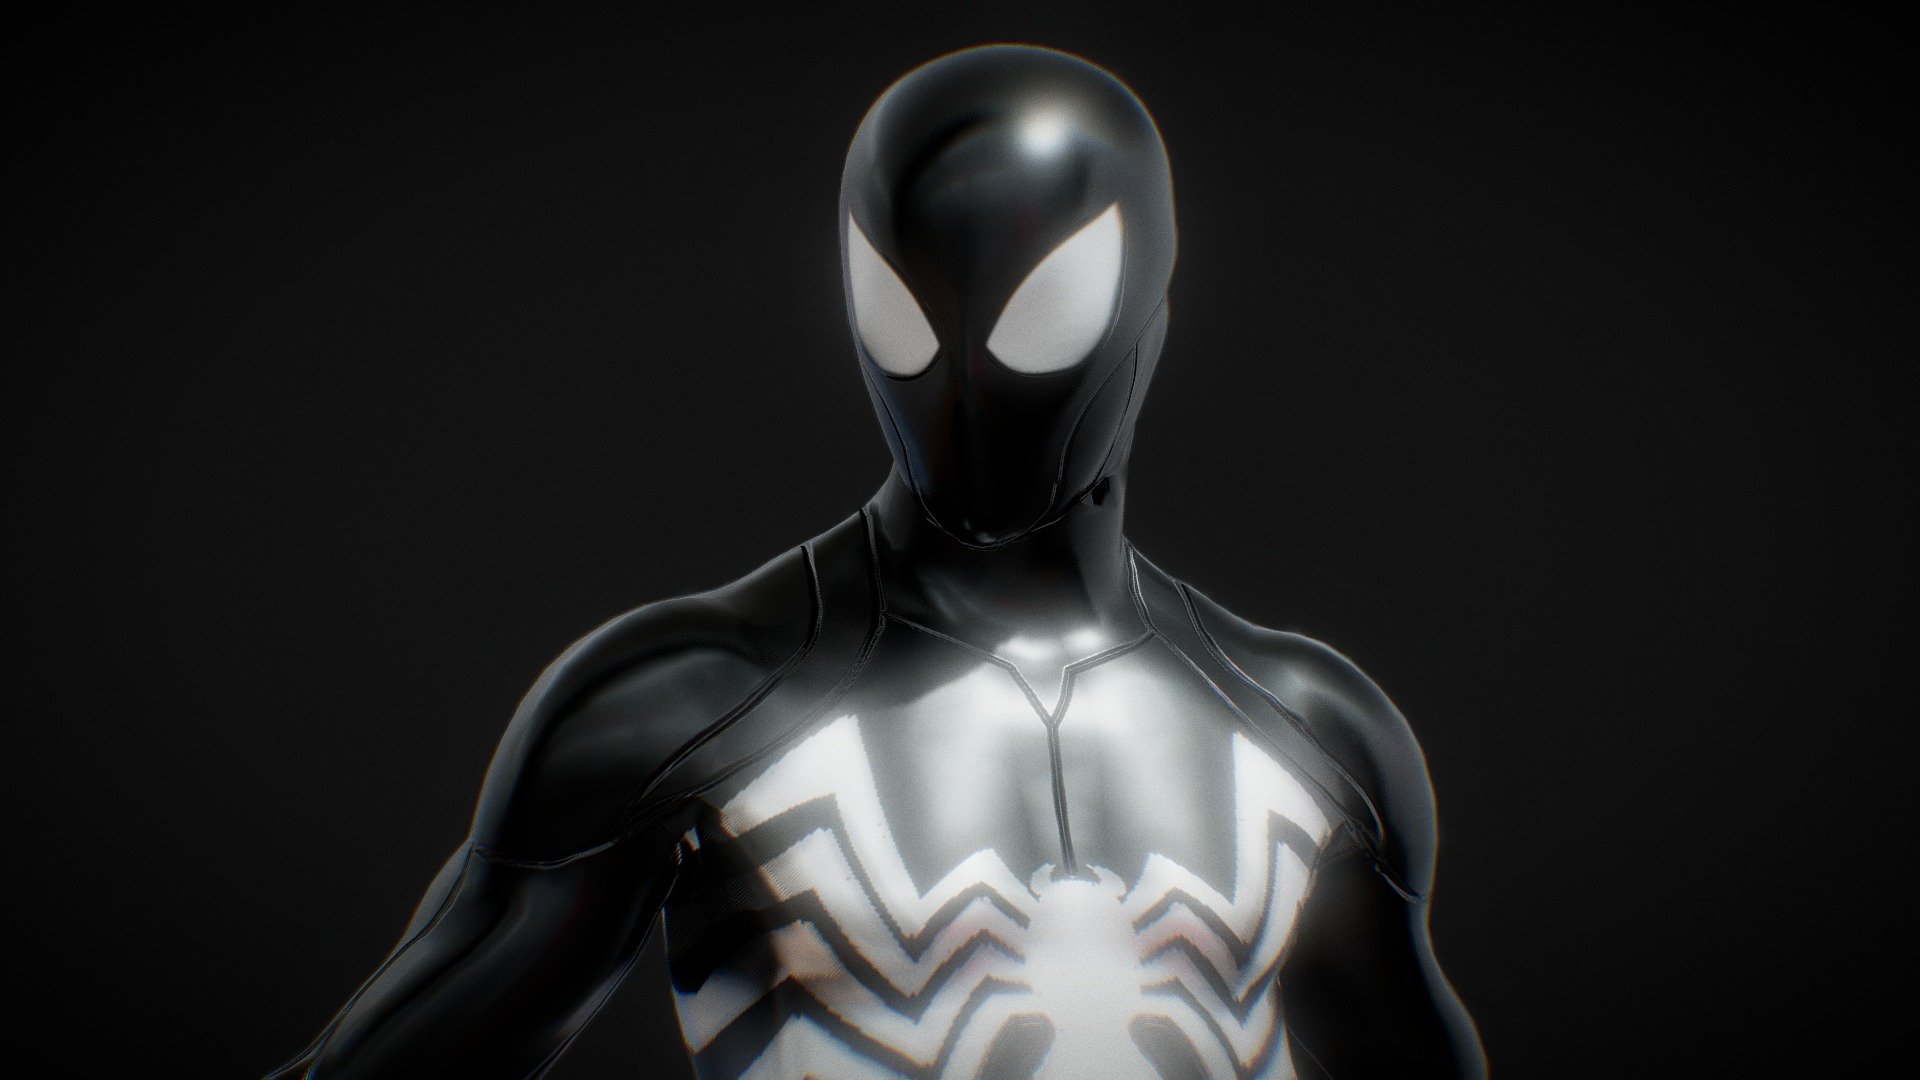 Spider-Man Symbiote suit from the Spider-Man 2 PS5 game :D

Rigged

Textured

I dont know there's missing the noise texture in the fbx file, so let me know it so i can upload the blend file too!. Anyway hope you like it :D - Spider-Man Symbiote Spider-Man 2 PS5 - Download Free 3D model by CVRxEarth 3d model